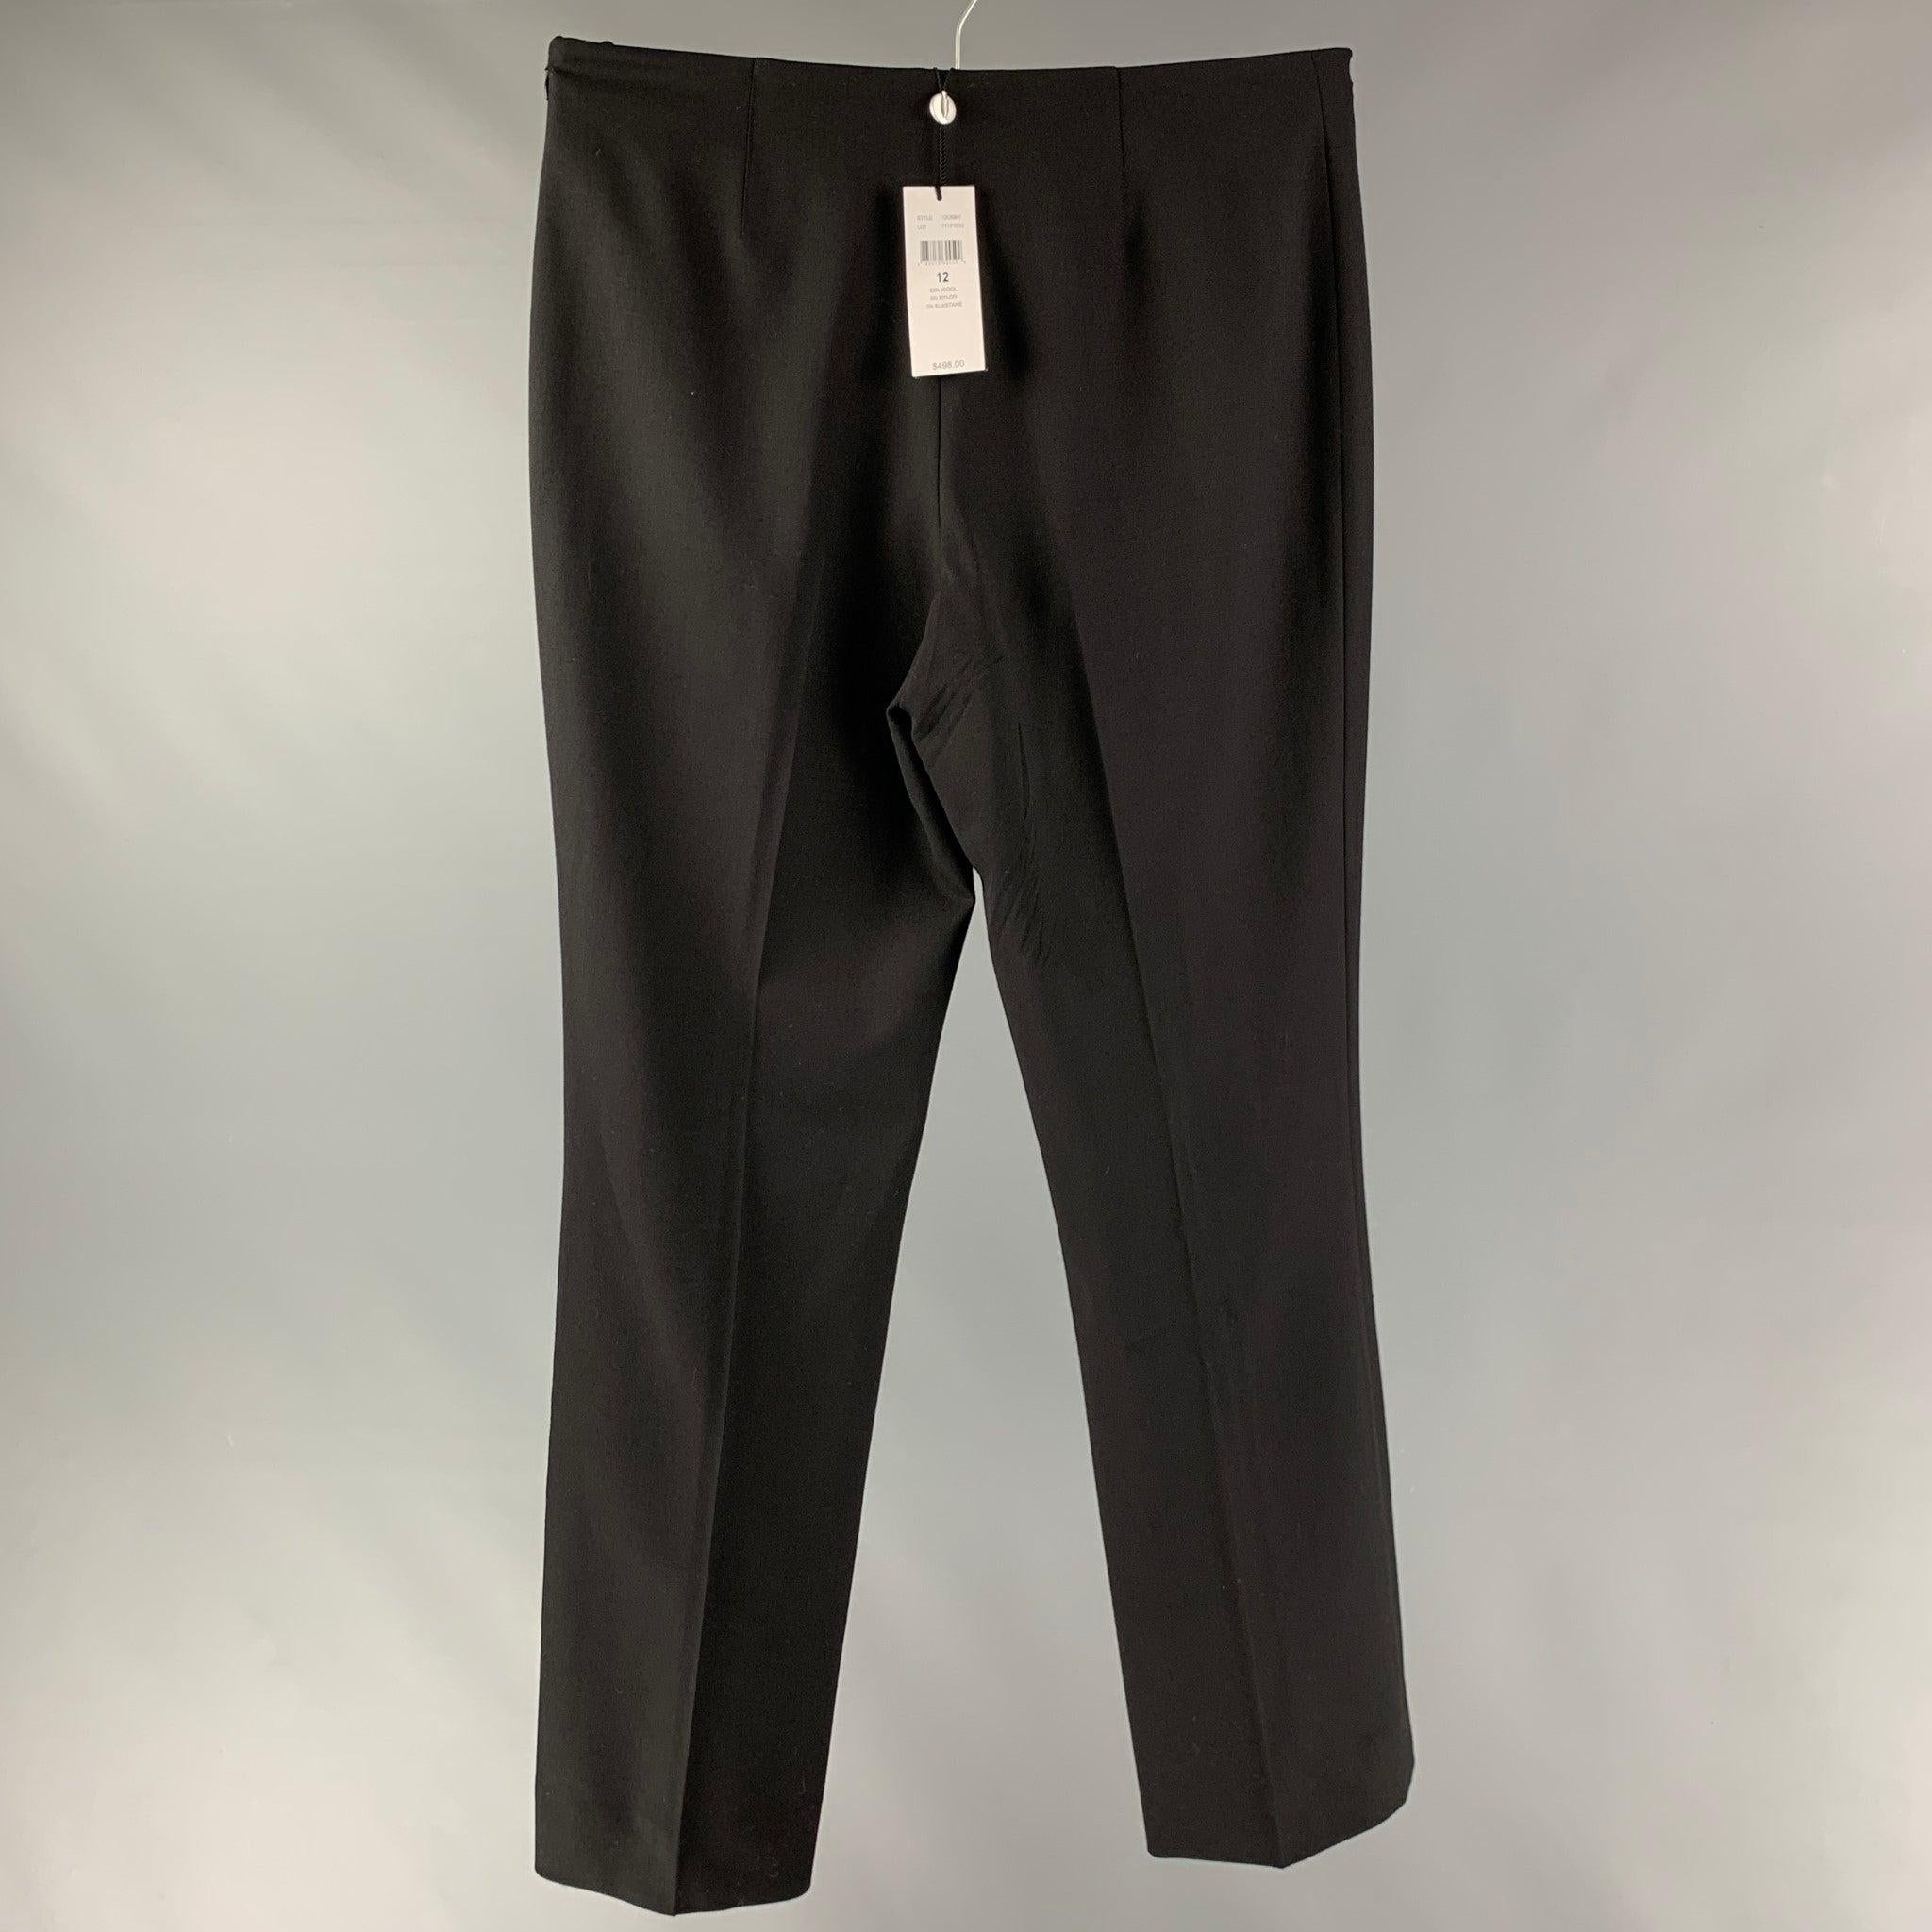 RALPH LAUREN BLACK LABEL dress pants comes in black wool blend material, featuring a side seam invisible zip up closure and straight legs.New With Tags. 

Marked:   12 

Measurements: 
  Waist: 35 inches  Rise: 12.5 inches  Inseam: 33 inches 

  
 